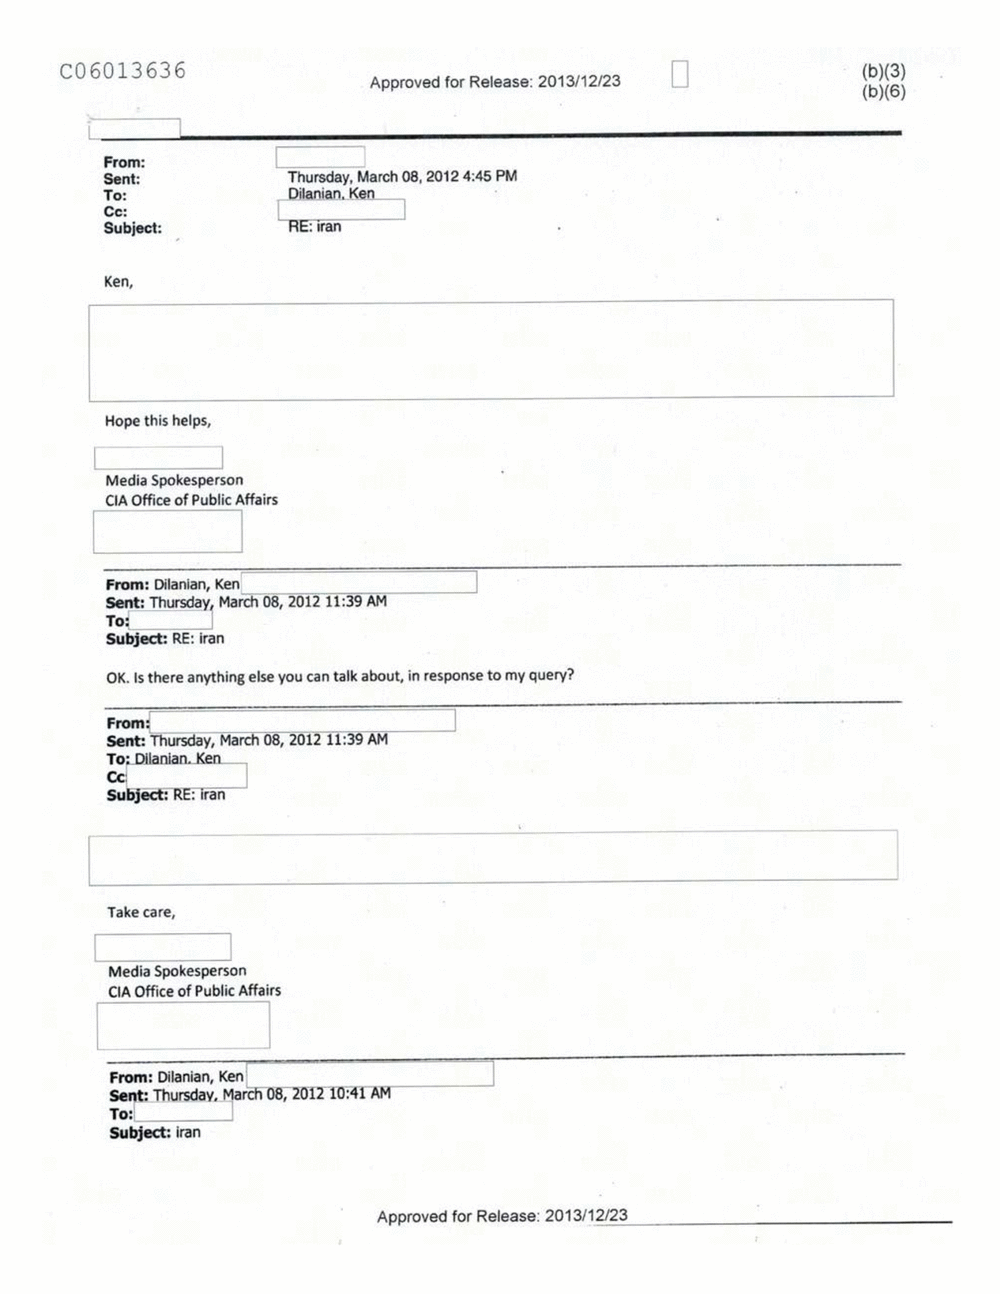 Page 474 from Email Correspondence Between Reporters and CIA Flacks